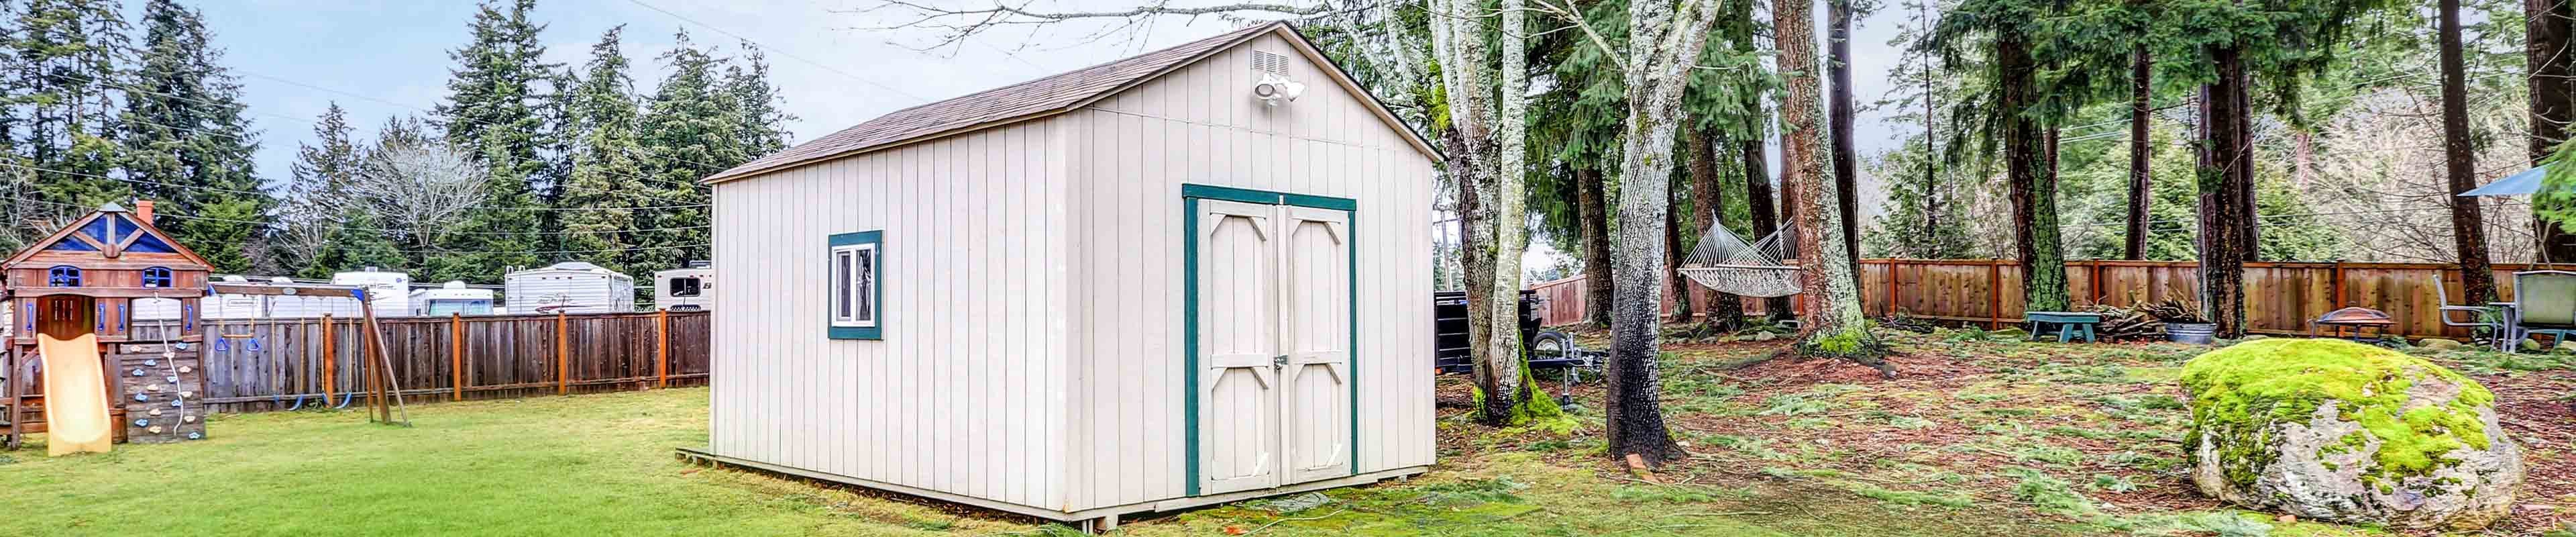 A white backyard shed with vertical siding and teal blue painted trim around the doors and on the single window on the side built in a mowed, fenced-in backyard with a kids' slide and a hammock. There is a trailer park in the background behind the fence.